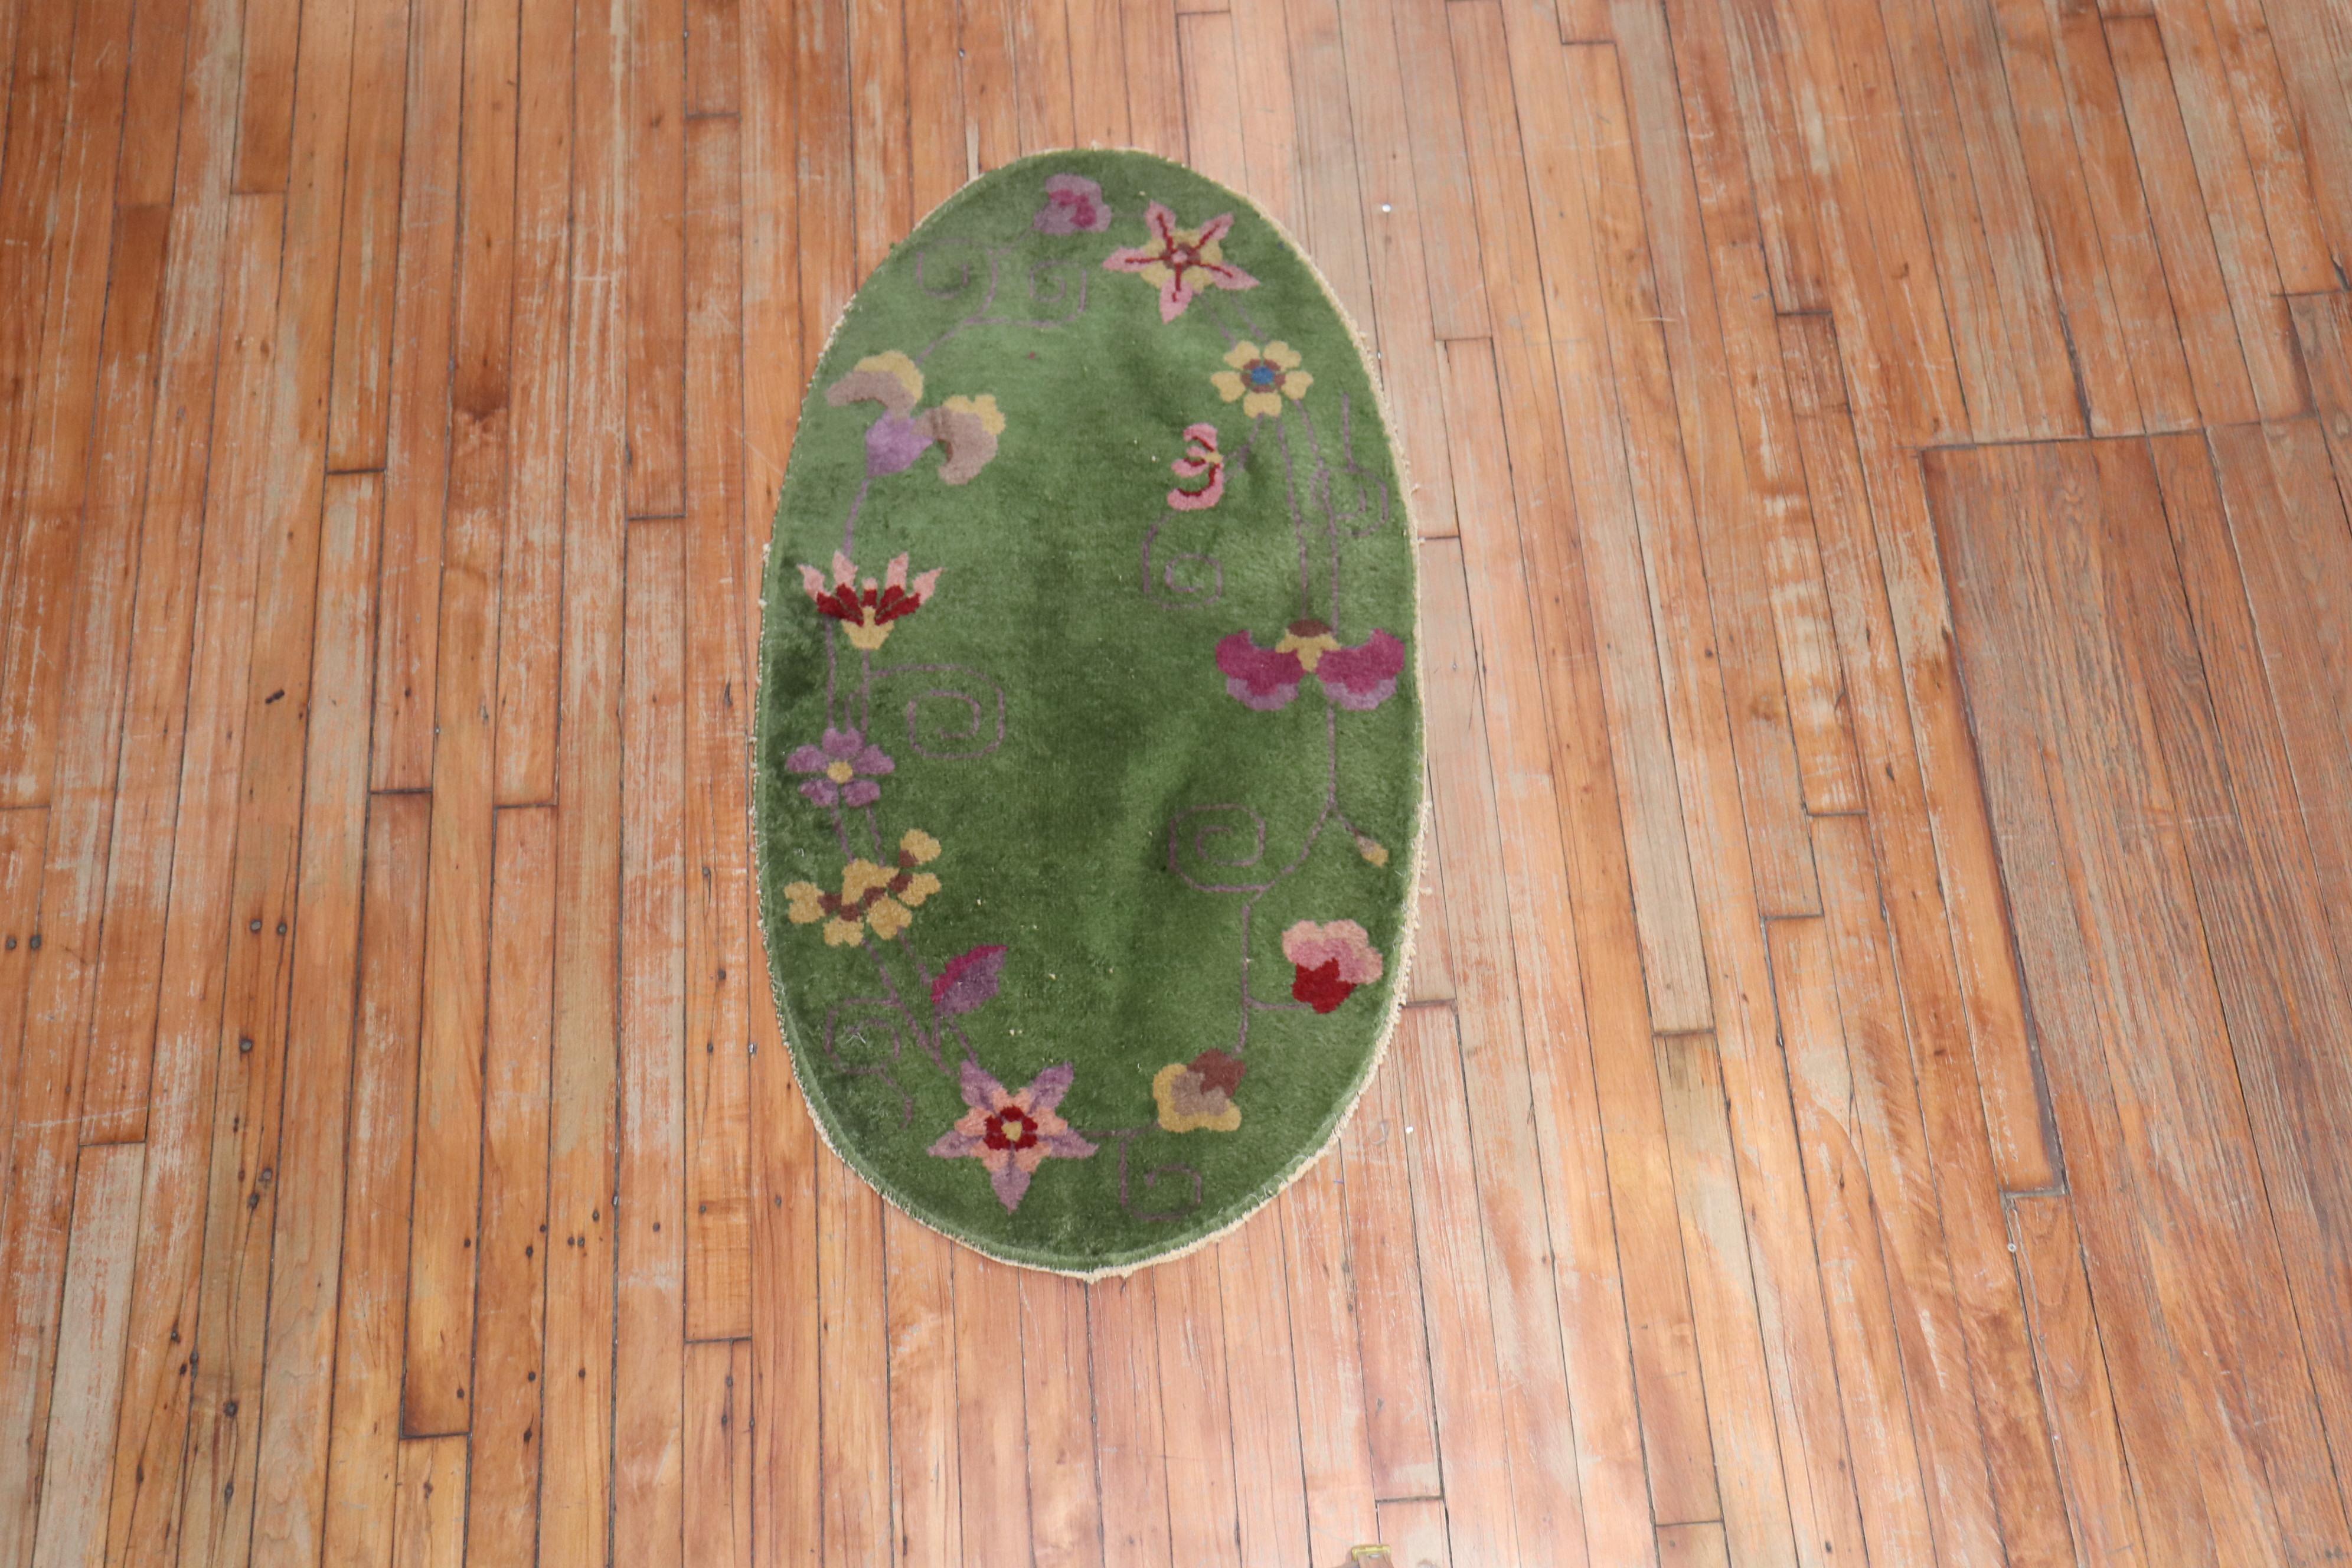 Rare oval-shaped Green Chinese Art Deco rug.

Measures: 2' x 3'10''

Chinese Art Deco rugs are known for their striking mix of asymmetrical patterns, vibrant colors, and traditional motifs, which are is bold, beautiful, and quite rare. Woven